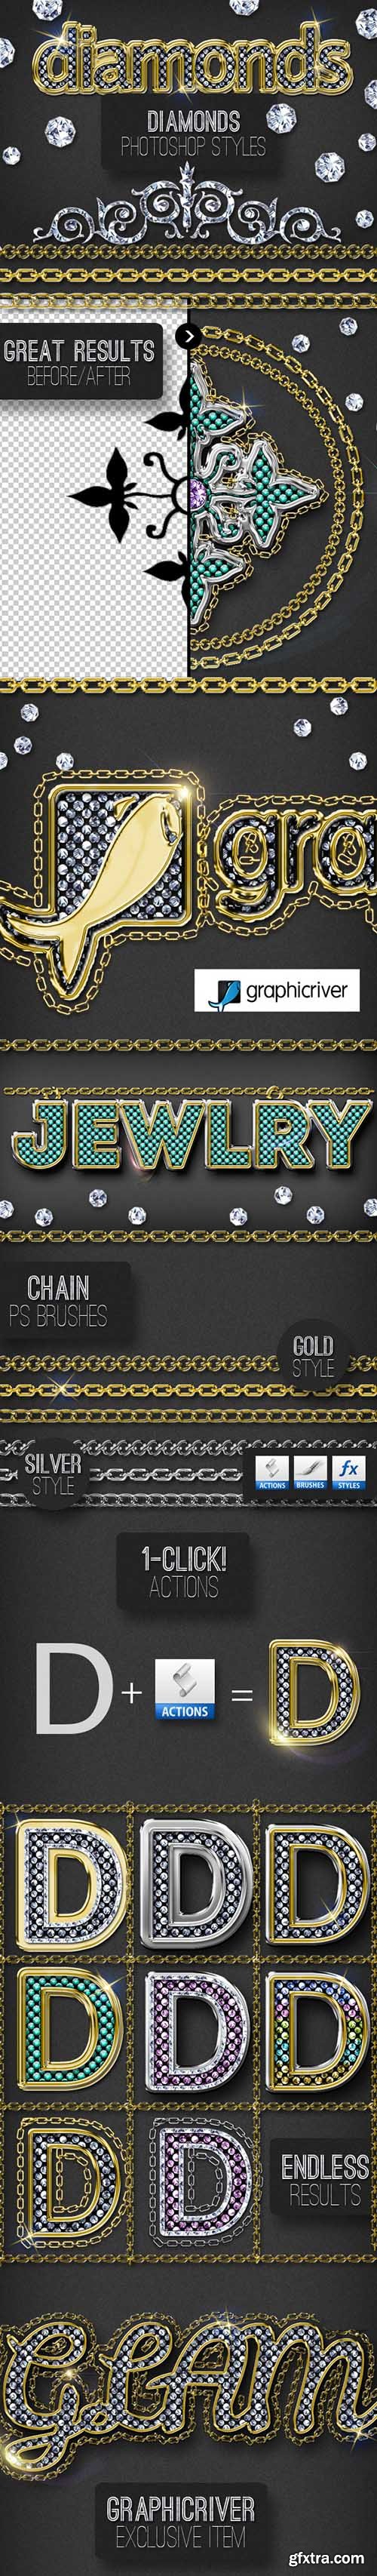 GraphicRiver Bling Bling Diamond Photoshop Style Creator 10250581